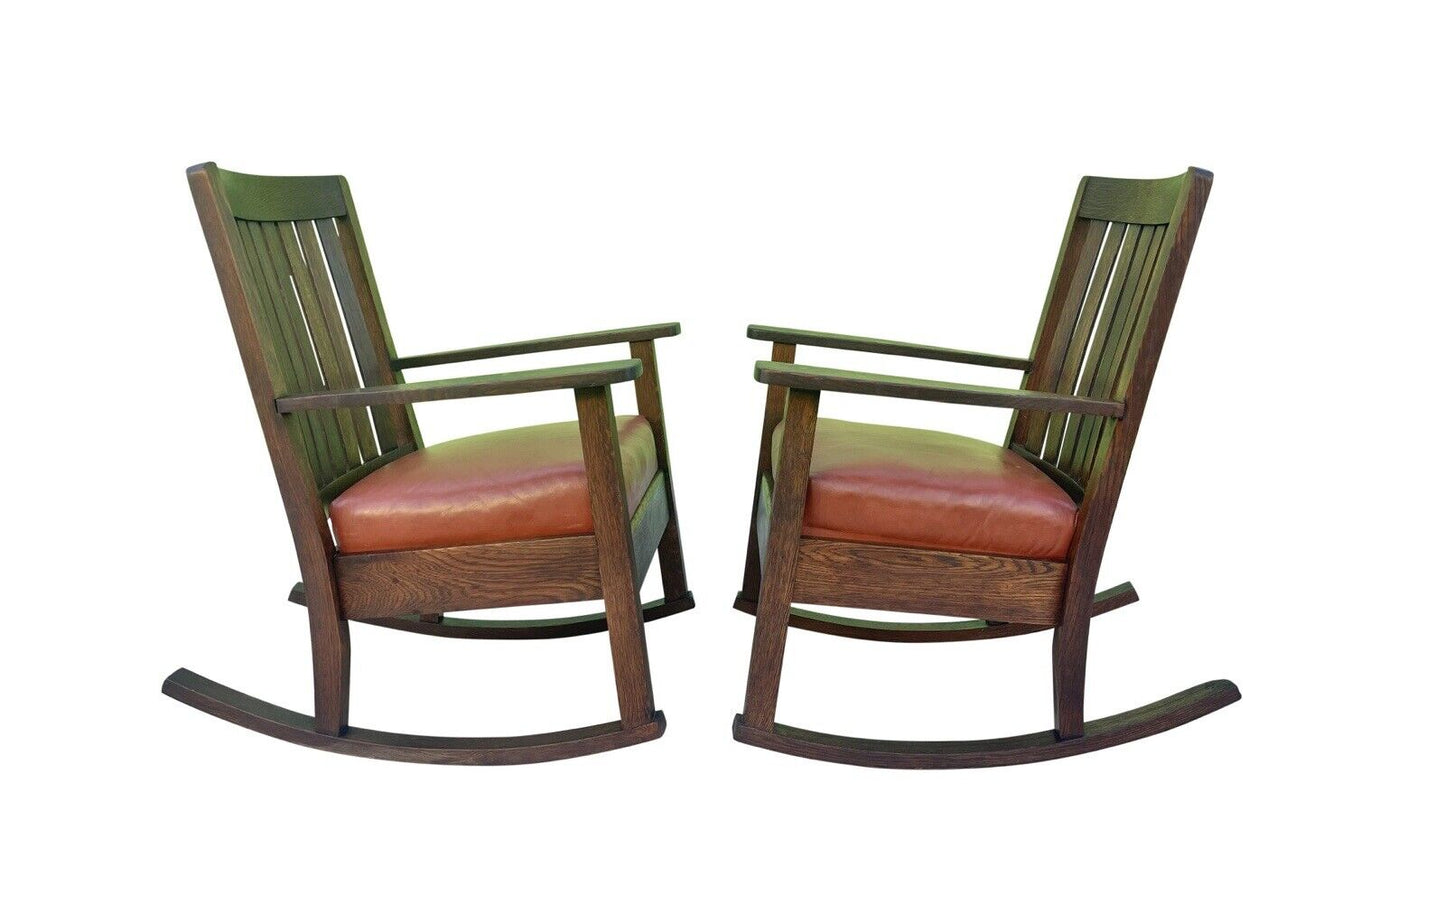 Pair of Antique Arts & Crafts Tiger Oak Rocking Chairs With Orange Leather Seats